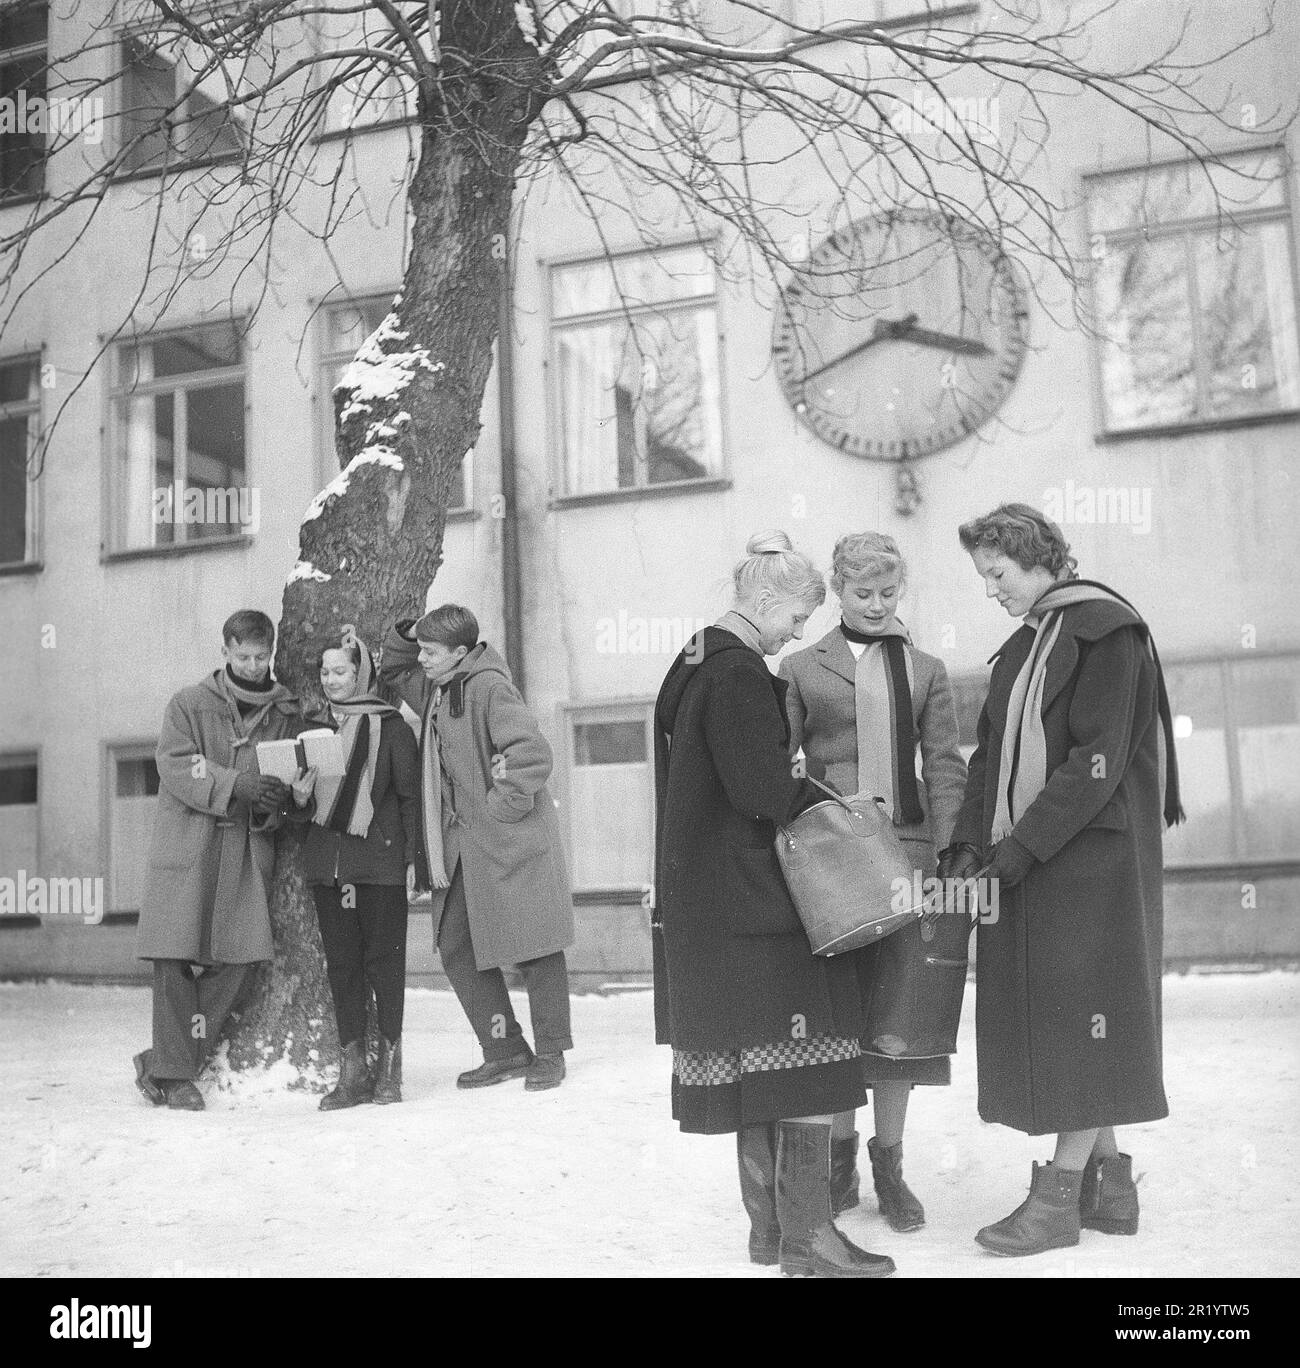 The teenage fashion in the 1950s. It is 1956 and the young people in the school yard are dressed in the duffel typical of the time. A classic outer coat in wool for both men and women. The garment was very popular for a number of years. Sweden 1956 Kristoffersson ref BX50-4 Stock Photo